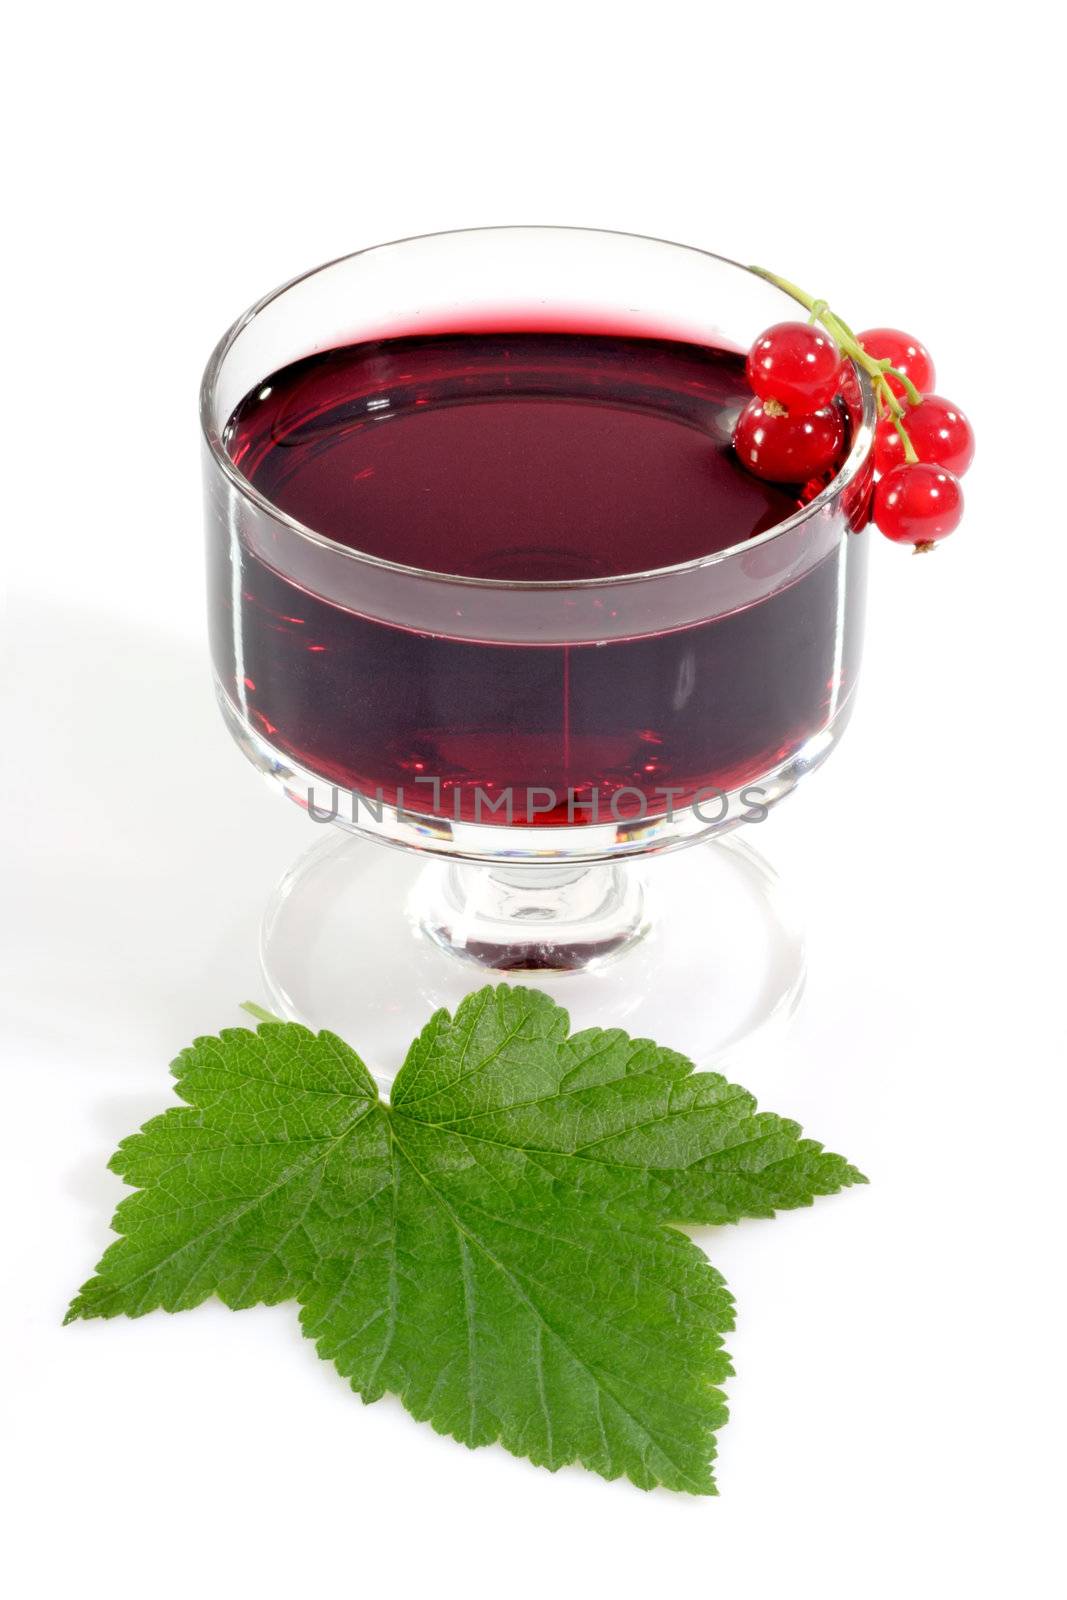 A glass of currant liqueur with garnish on light background